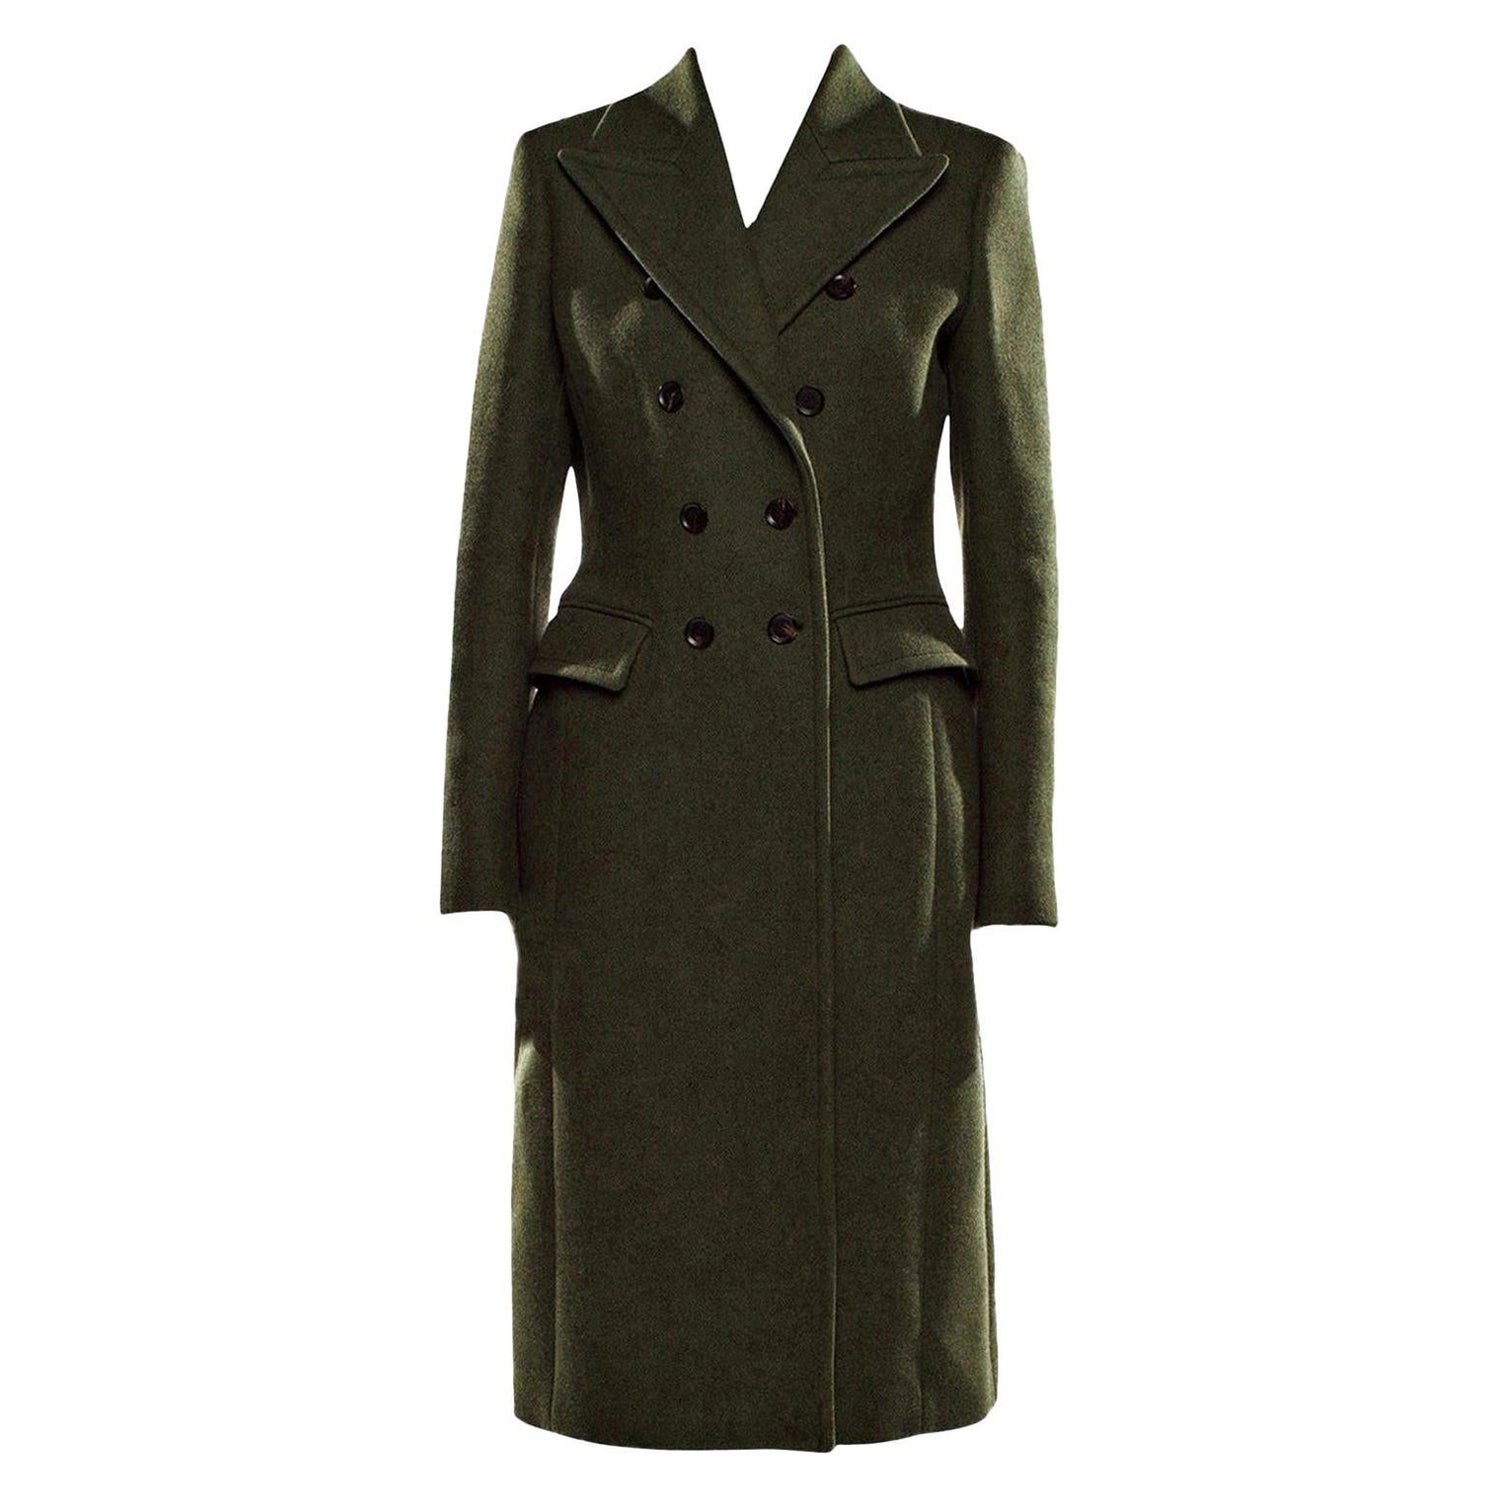 New Gucci $3215 Kate Upton Olive Green Wool Coat Jacket Fall 2013 With Tags